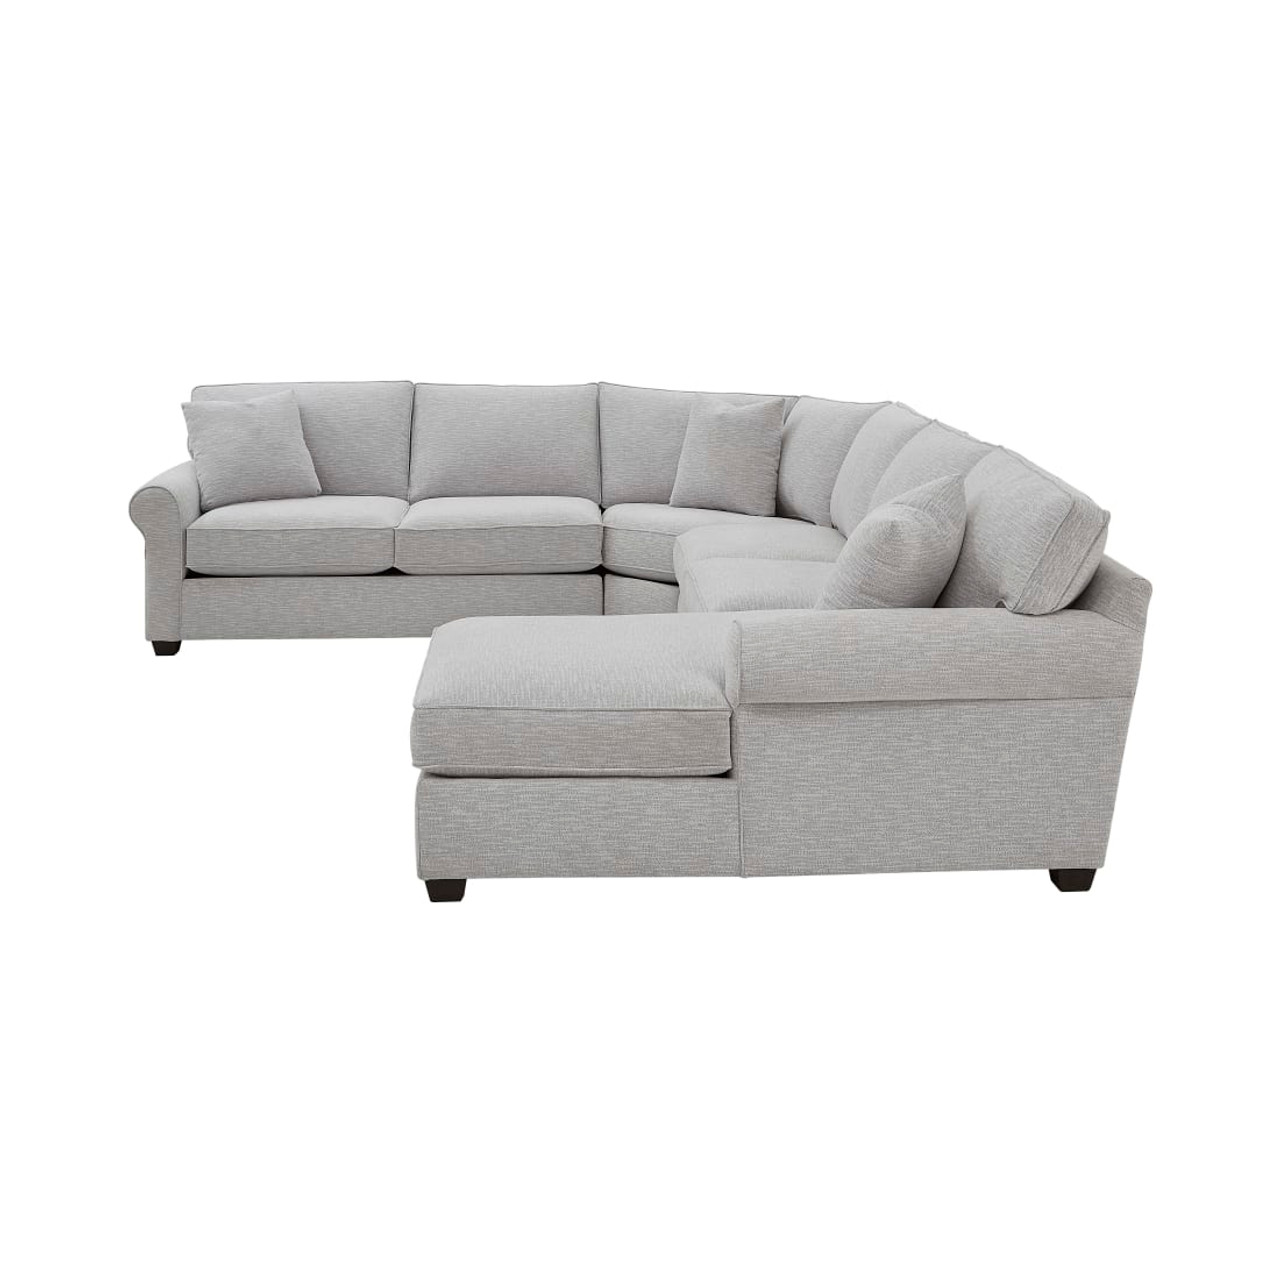 Crestview Rolled Arm Granite 4-pc sectional w/ right chaise